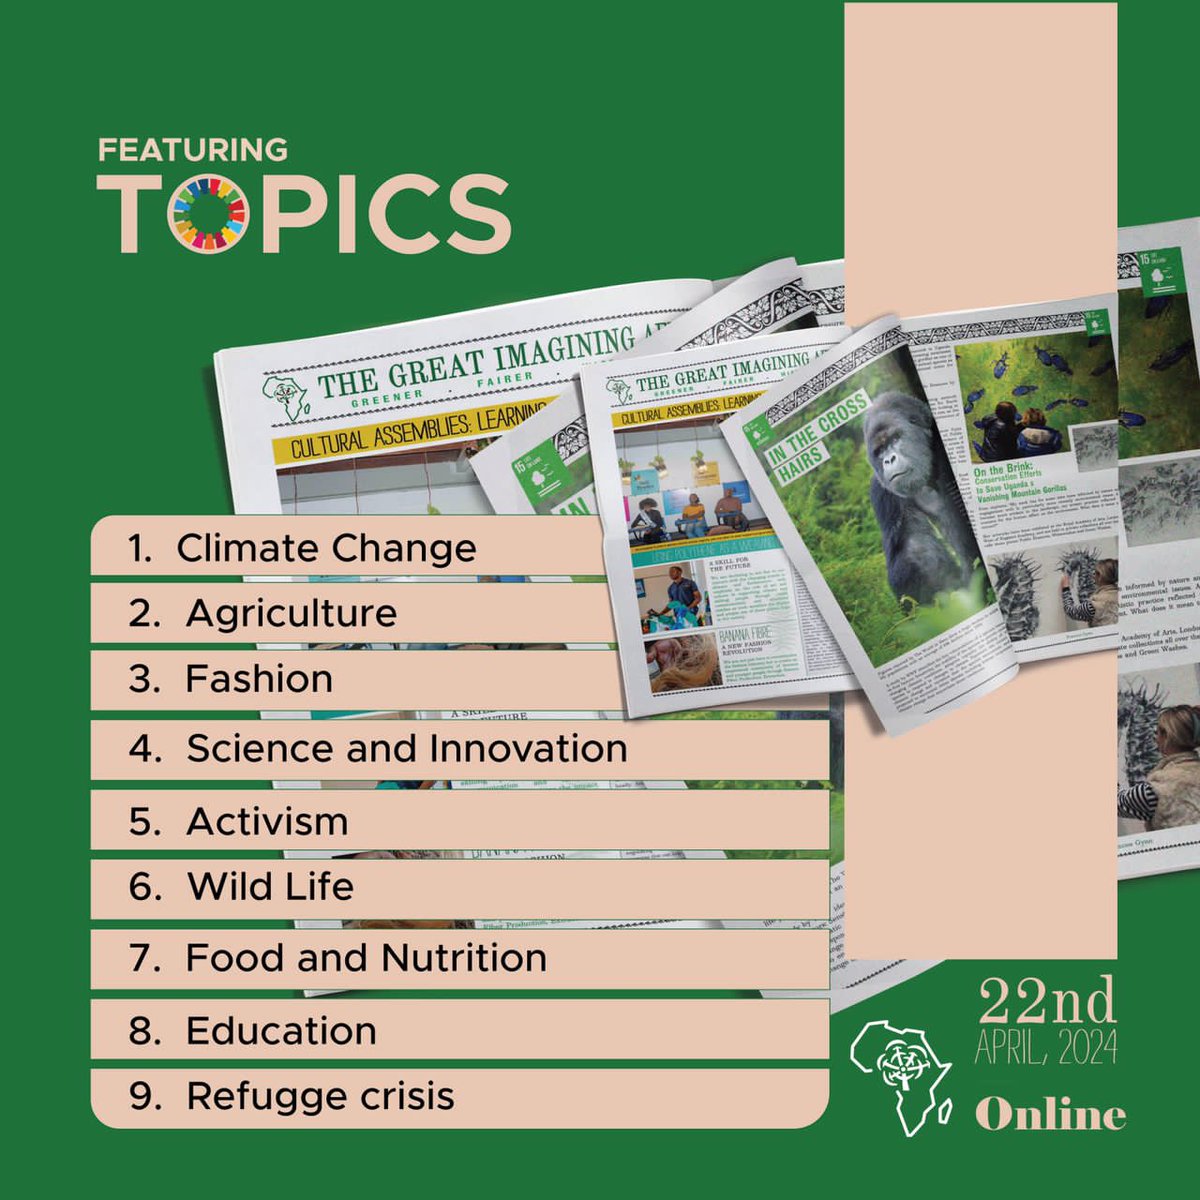 The Great Imagining' aims at igniting conversations, inspiring action, & and fostering collaboration in addressing climate change across Africa. Having topics ranging from the built environment to sustainable fashion, this publication serves as a beacon of hope for our planet.